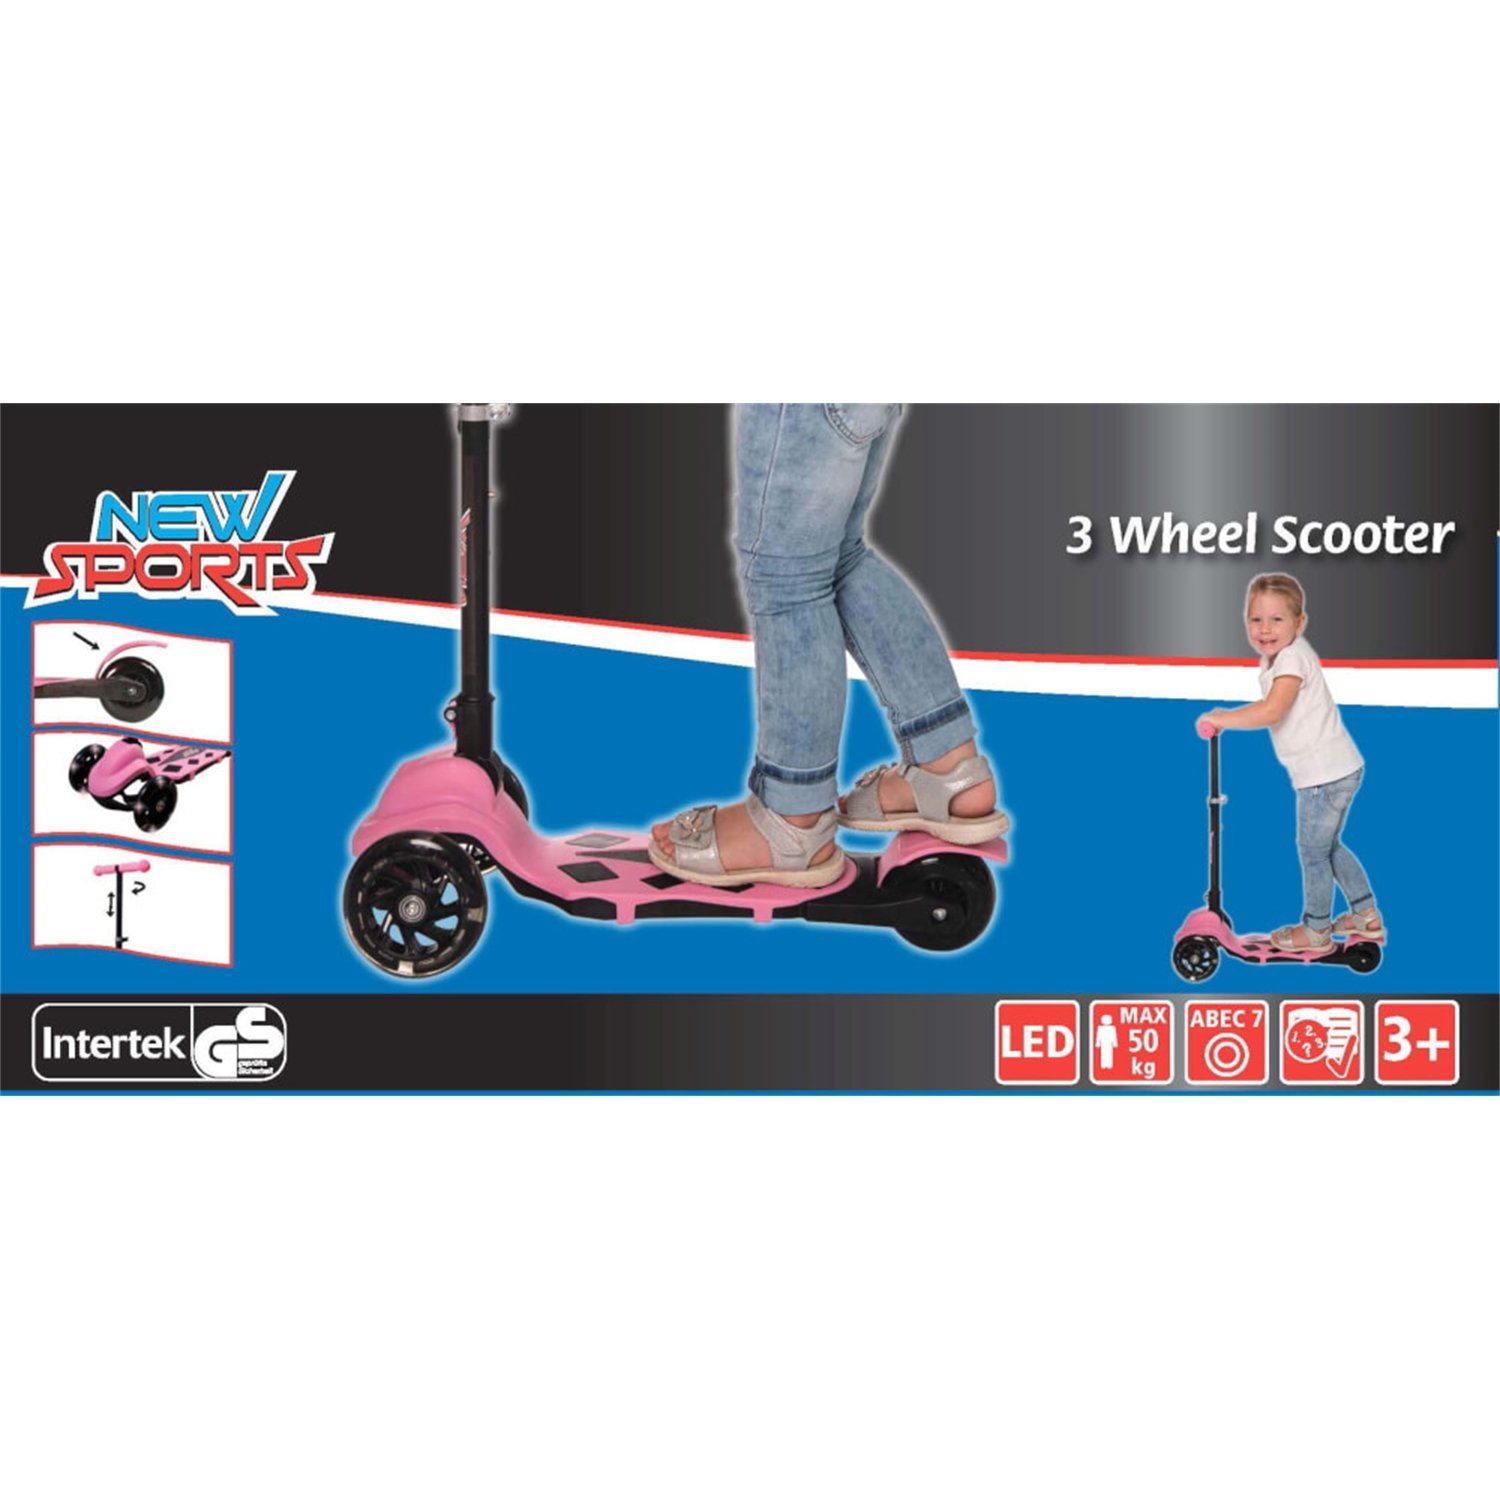 klappbar, Rosa, mm New 3-Wheel 73422019 Scooter Sports Vedes Scooter 110